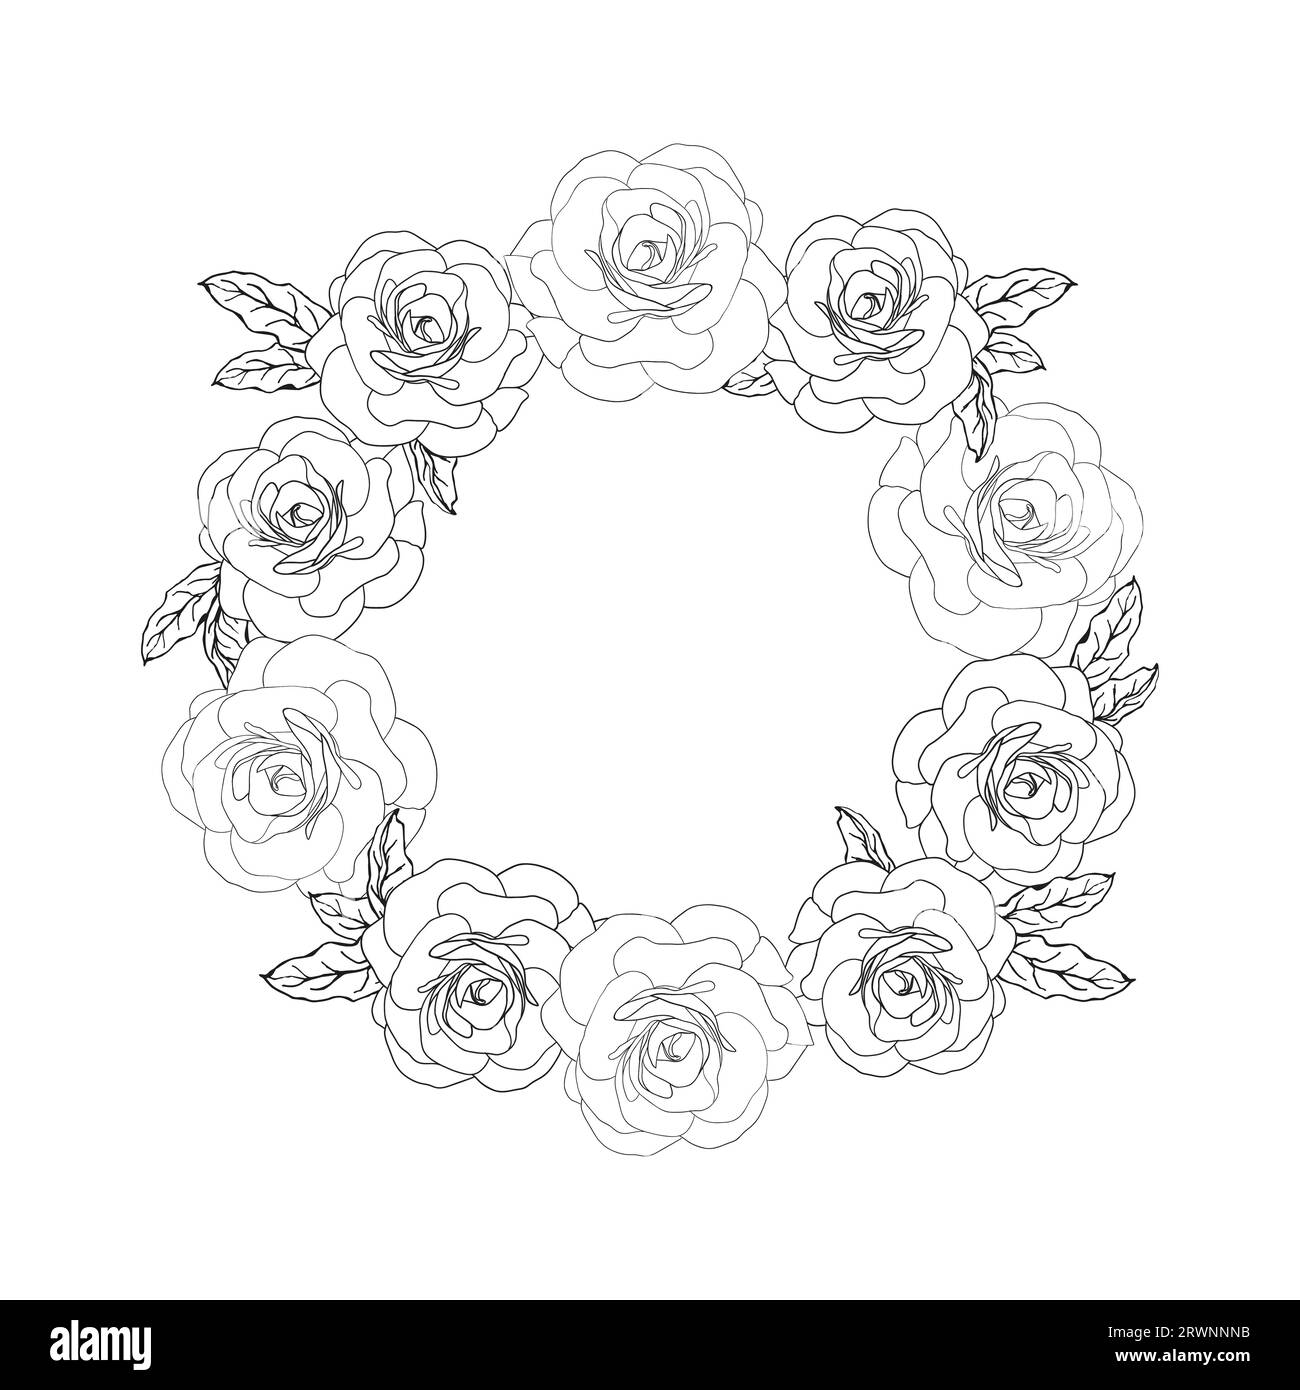 Vintage card with camellia flowers. Floral wreath. Sketched circle wreath, floral and herbs garland with camellia flower. Summer floral rose greeting Stock Vector